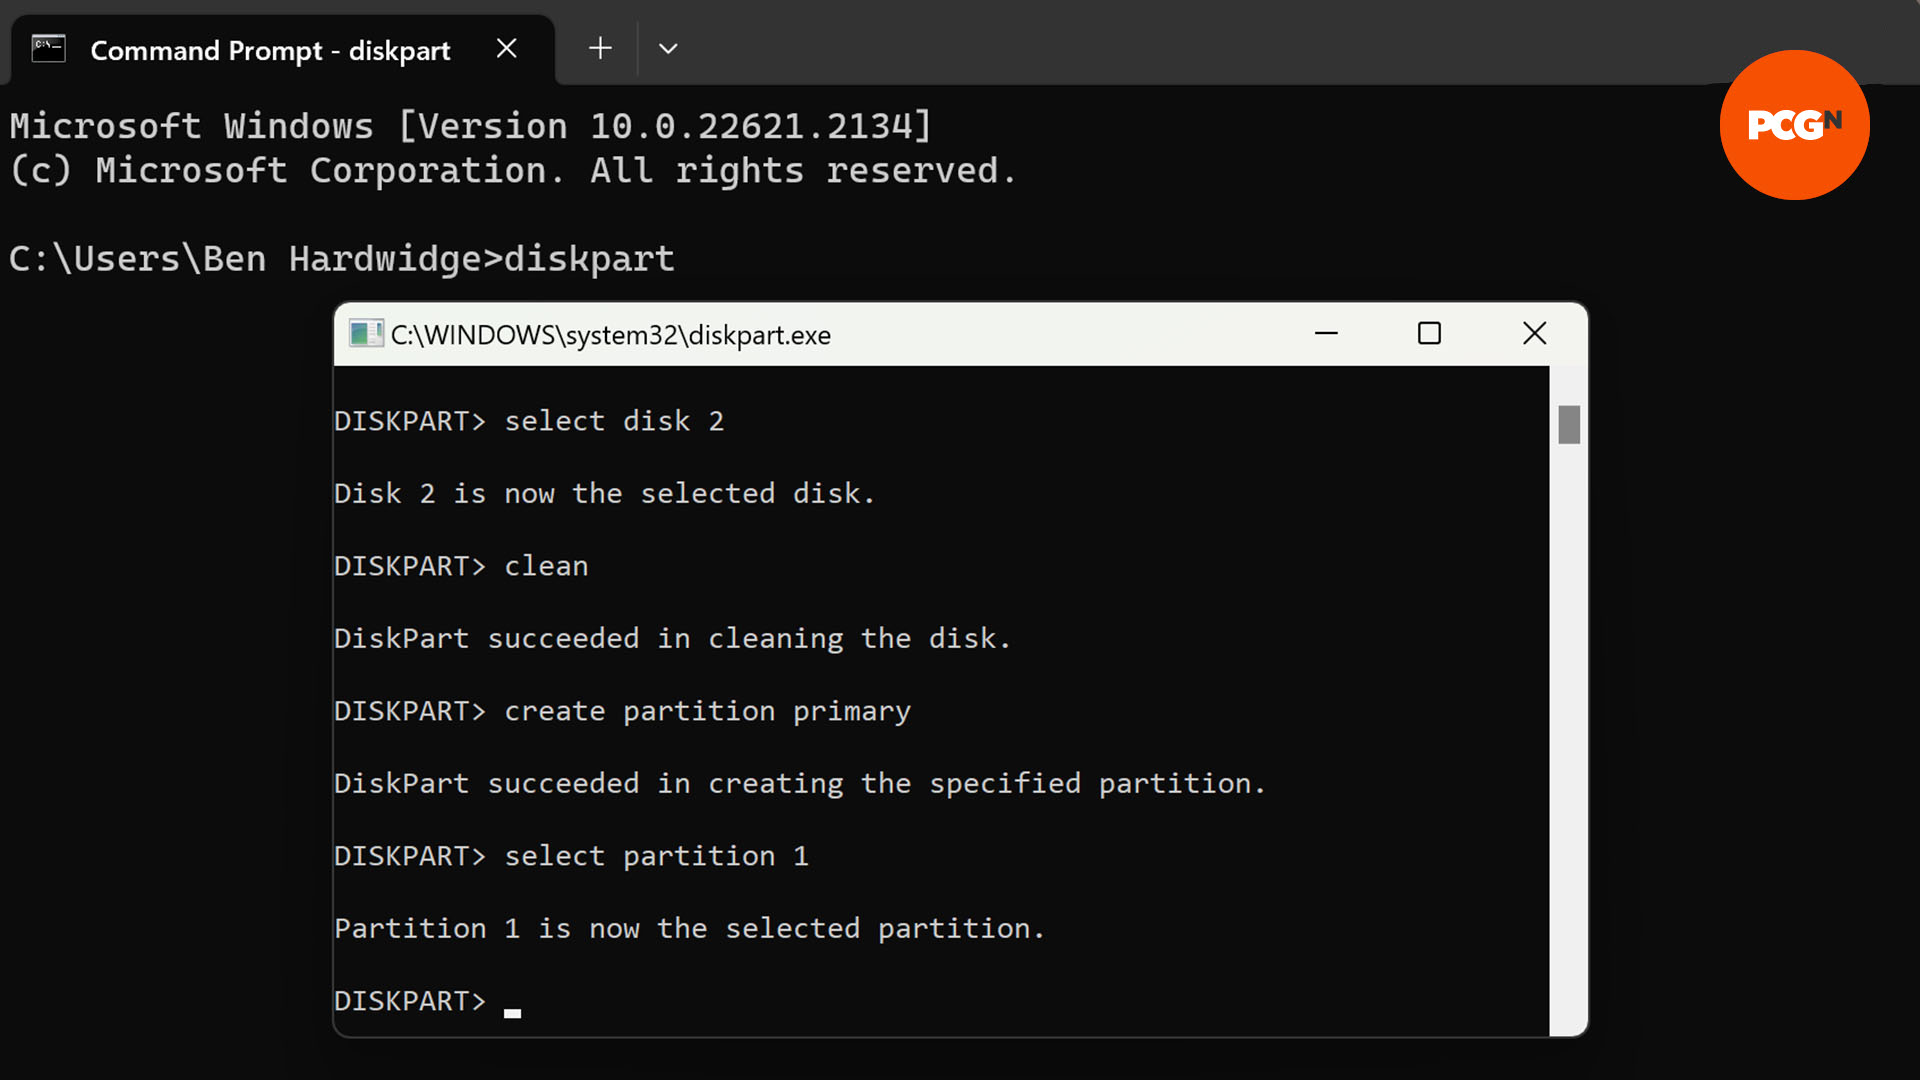 A partition is created on a chosen disk for a bootable USB via diskpart in command prompt